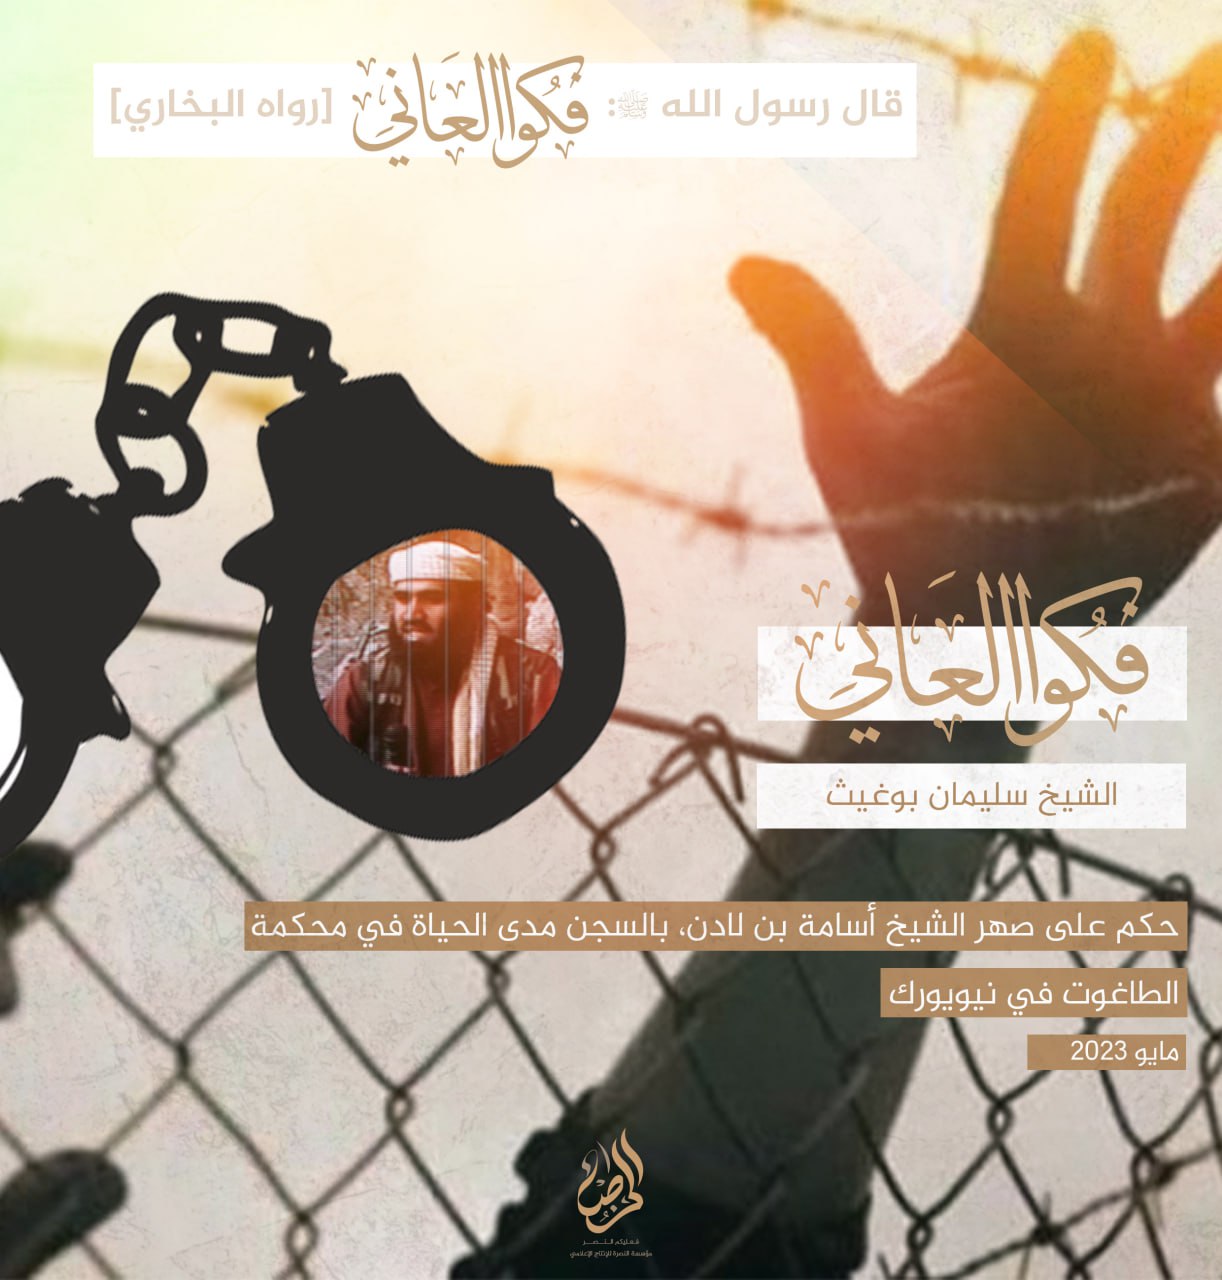 (Poster) al-Nusra Media (Unofficial al-Qaeda) Calls for the Release of Osama Bin Laden's Son in Law, Sulaiman Abu Ghaith, Who Was Sentenced Life in Prison in 2014 in New York, United States - 18 May 2023